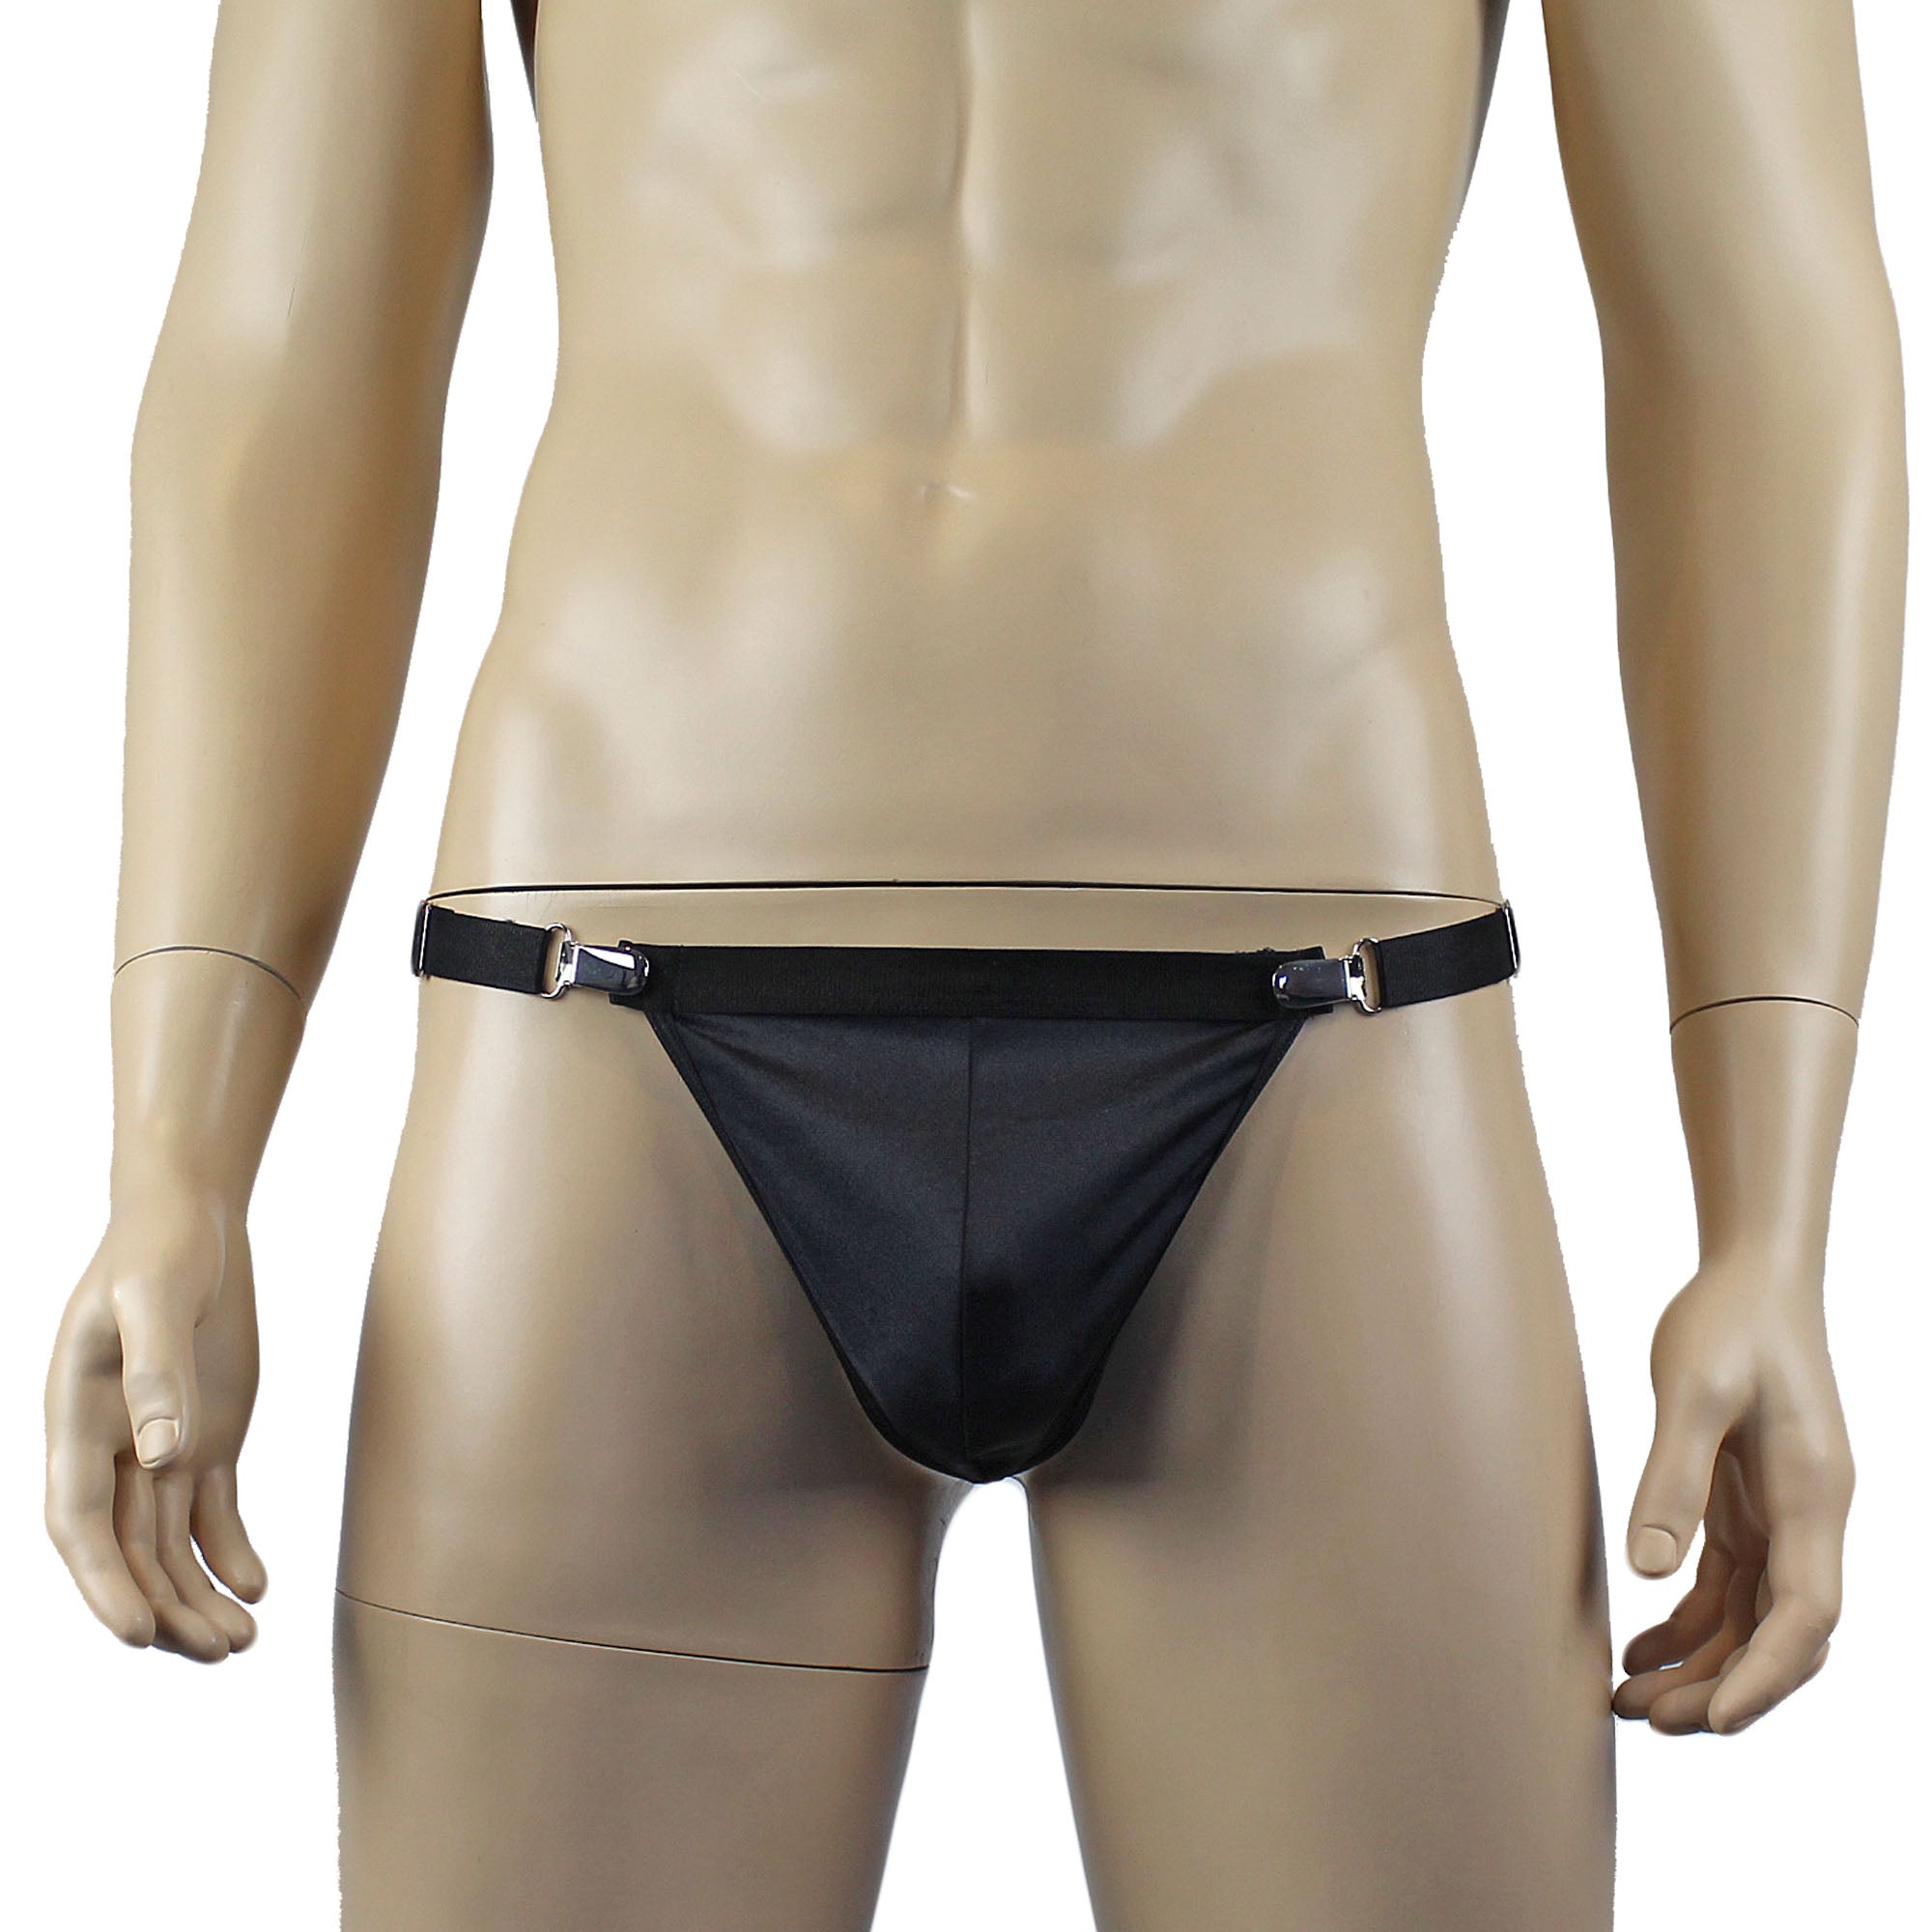 Mens Janice Thong with Adjustable Silver Clip Sides Black